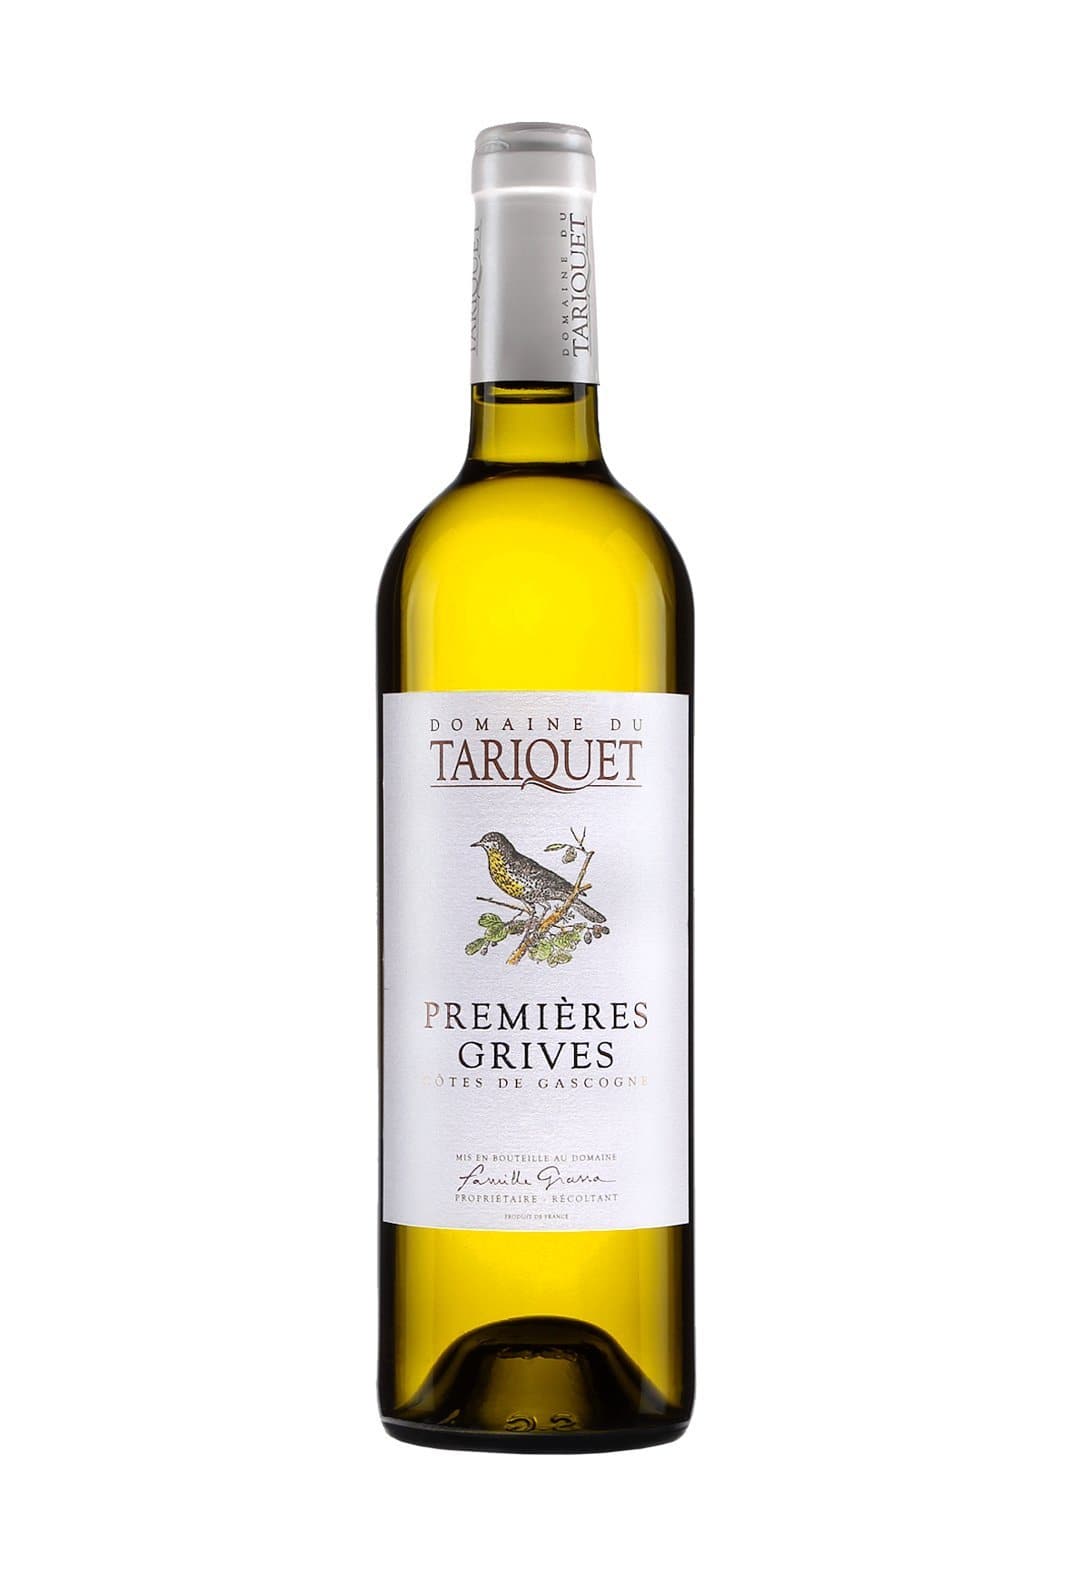 Domaine Tariquet Wine 'Premieres Grives' Gros Manseng Sweet White Wine 750ml | Wine | Shop online at Spirits of France